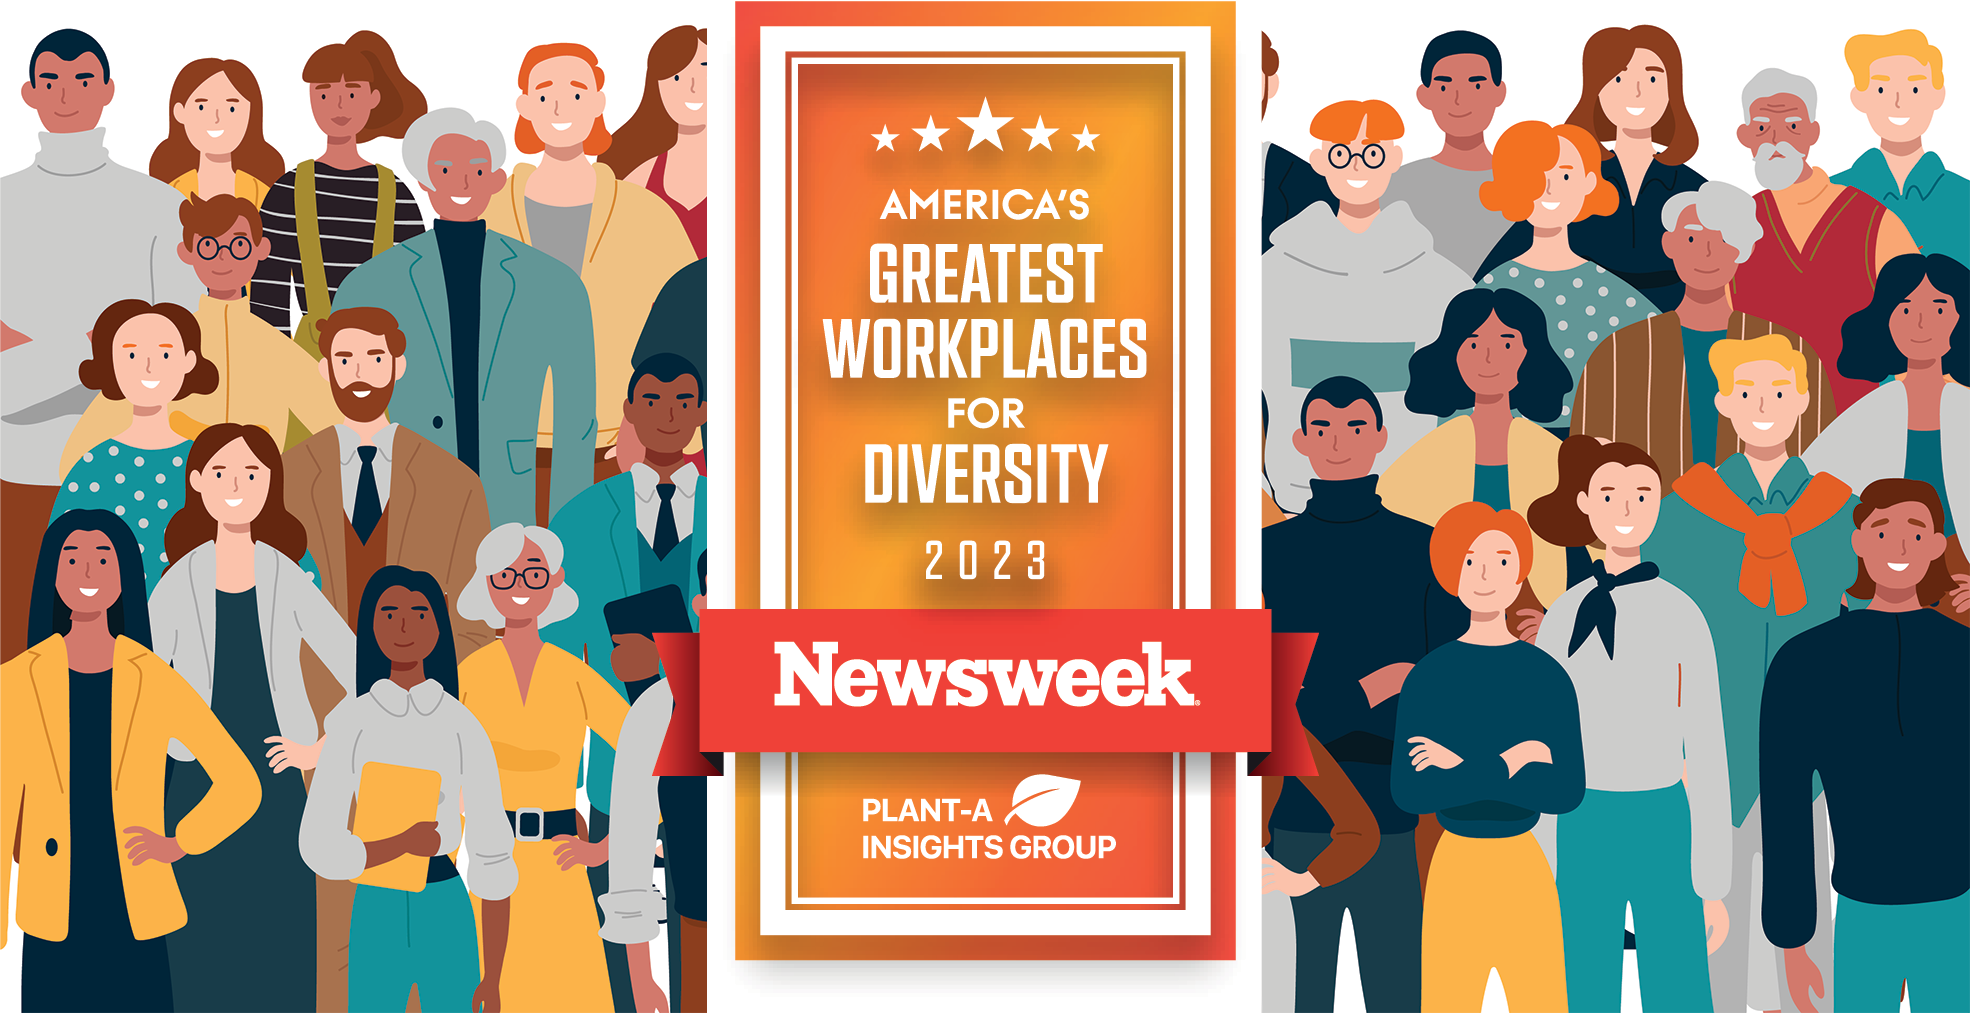 America's Greatest Workplaces for Diversity 2023 Announcement